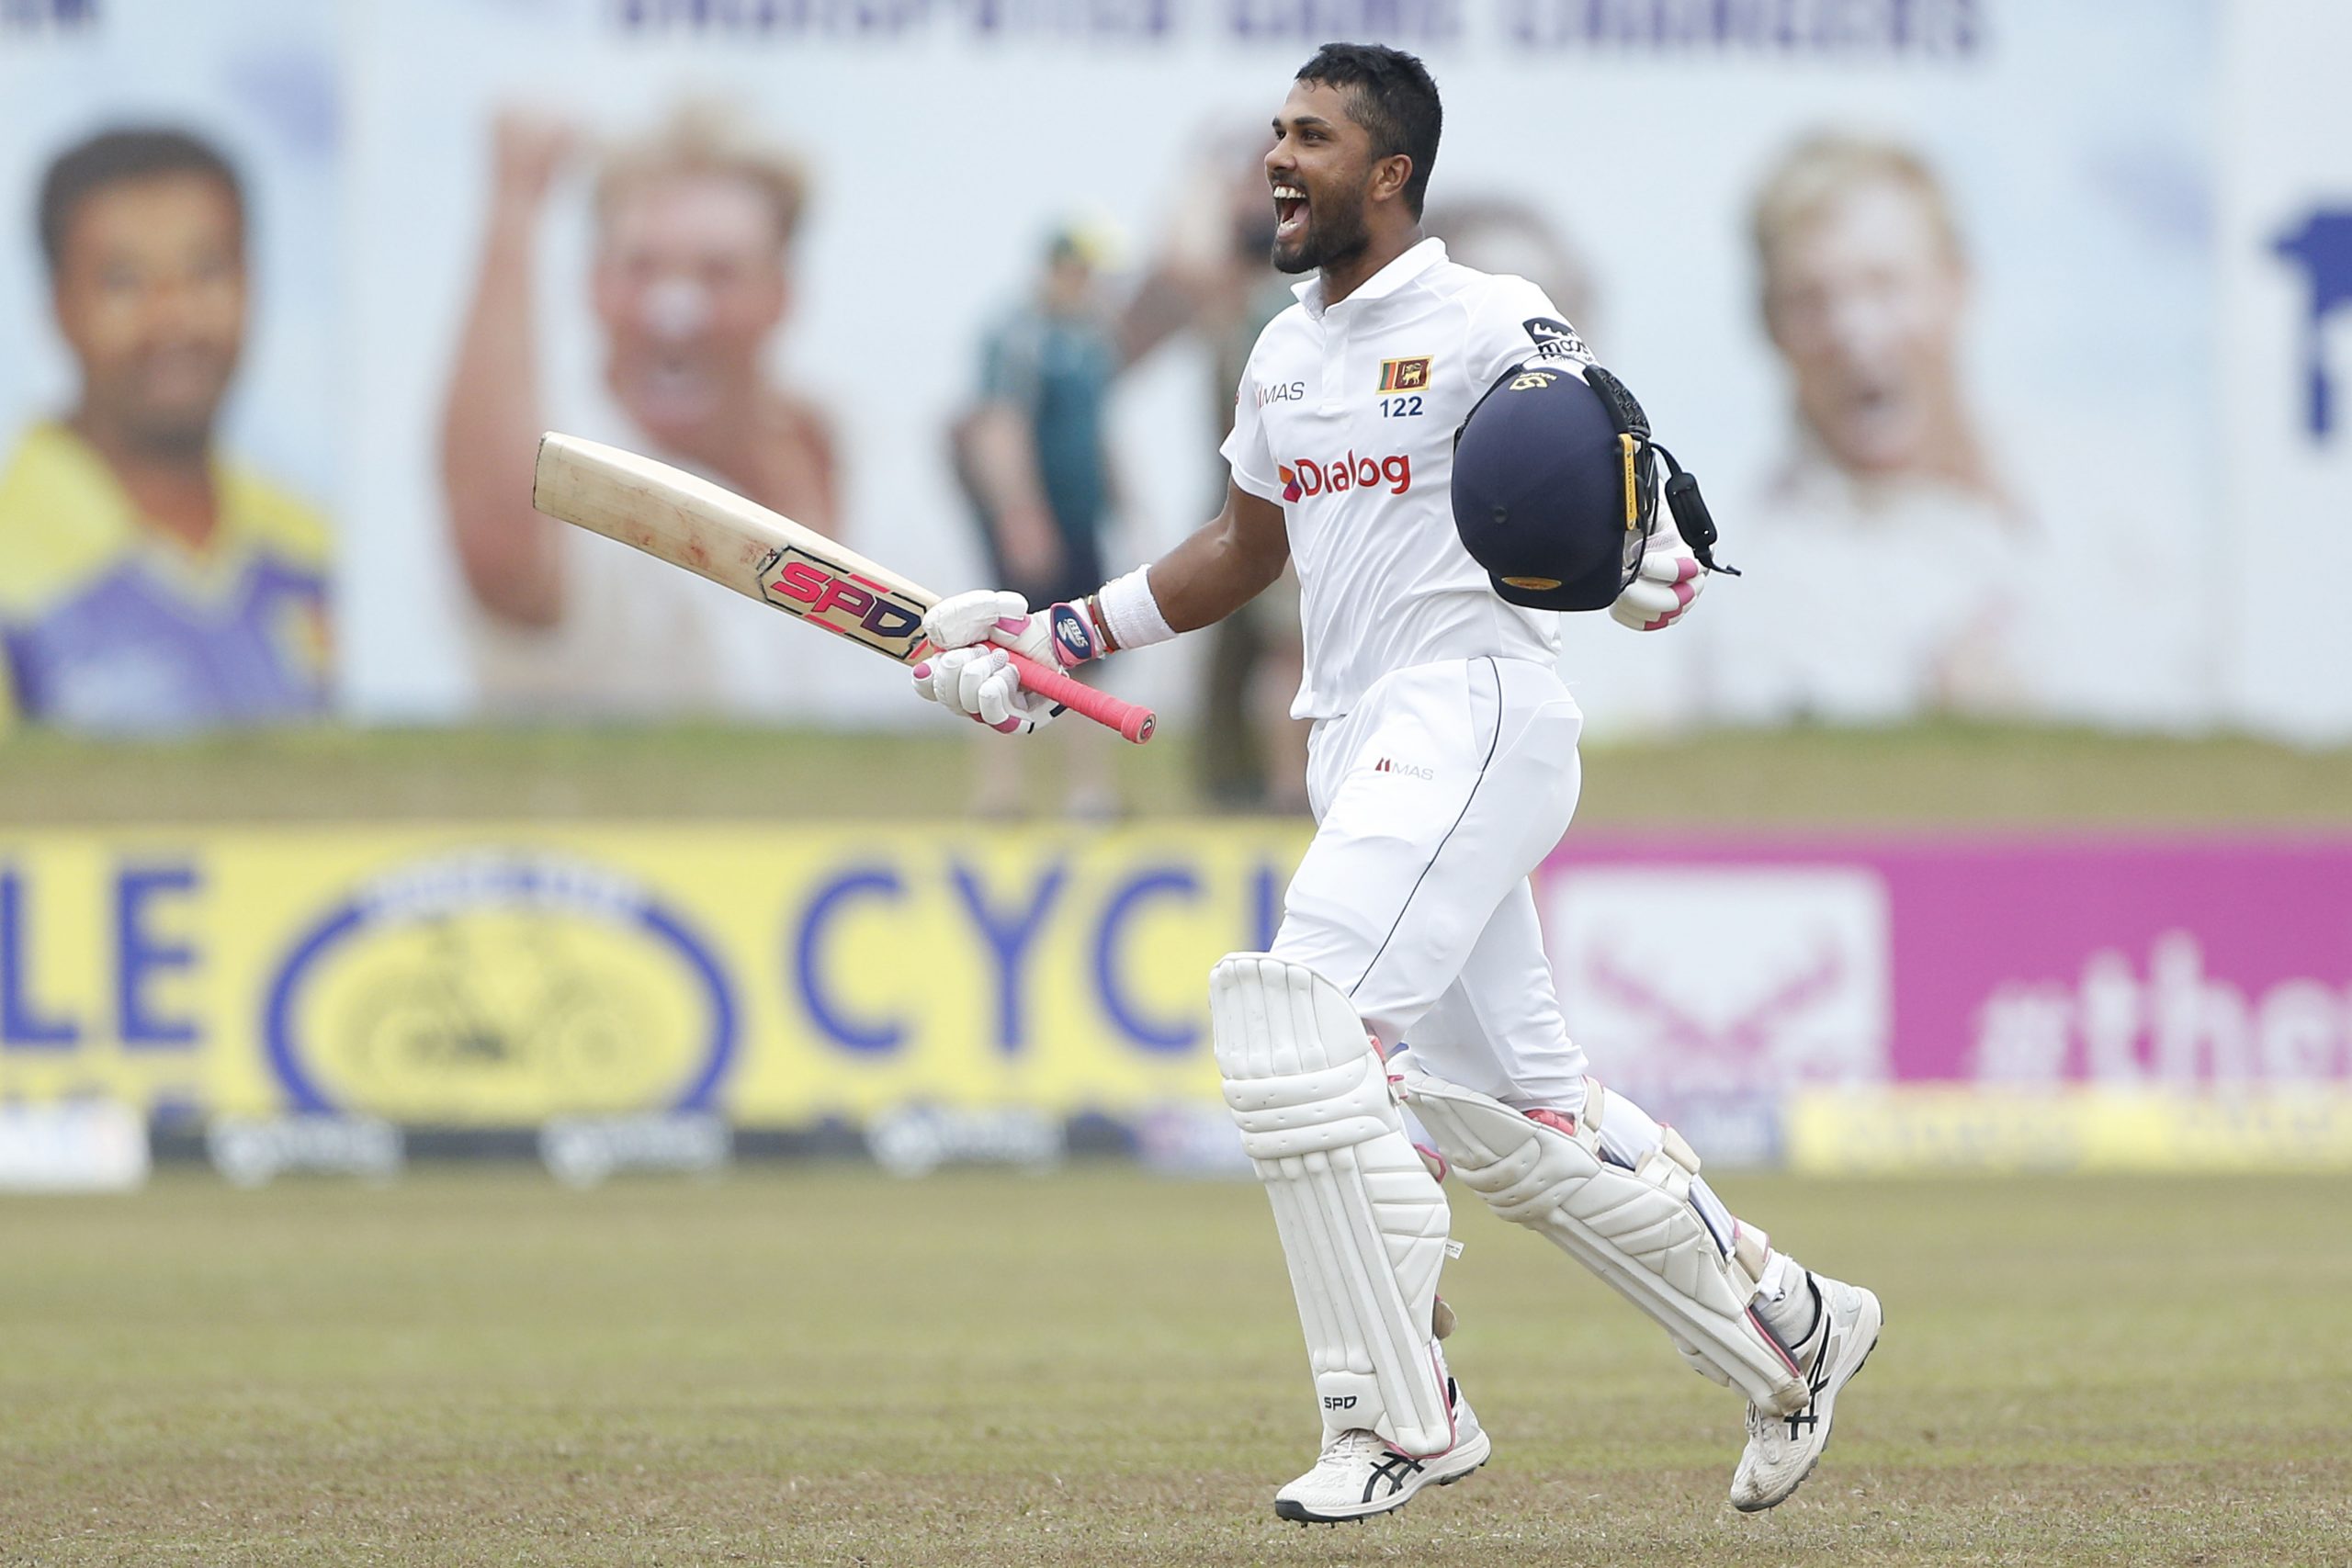 Dinesh Chandimal brings stability to SL middle order like flowing old wine